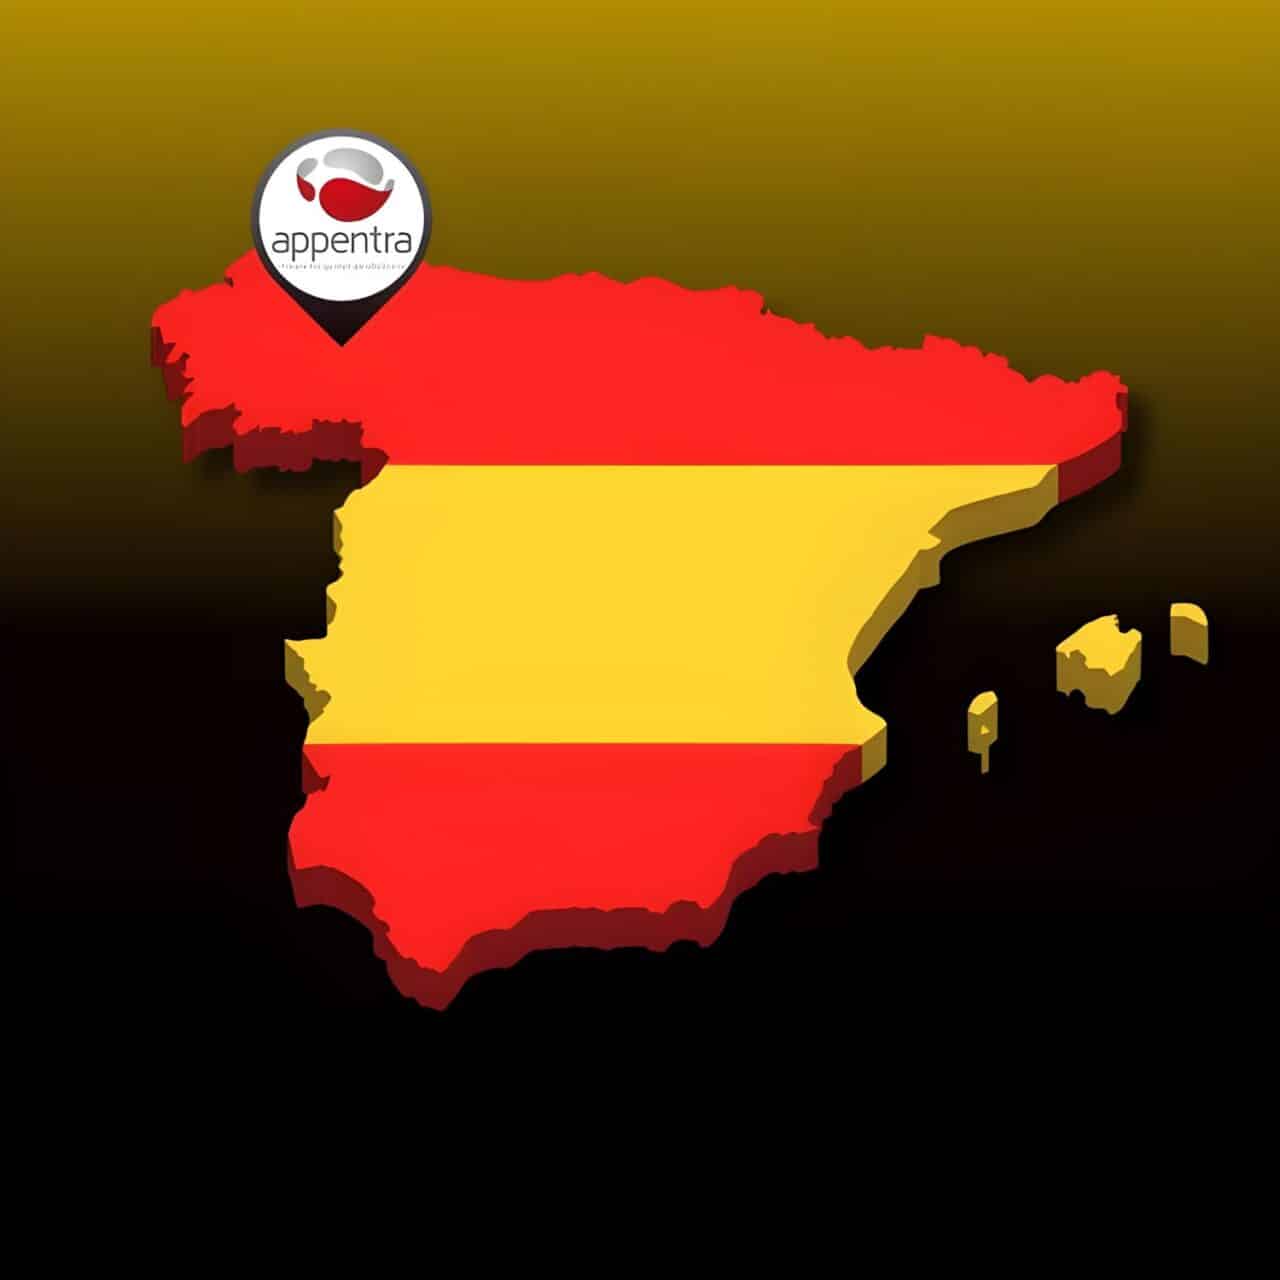 a map of Spain on a yellow & black background with Appentra logo presenting company's geo location